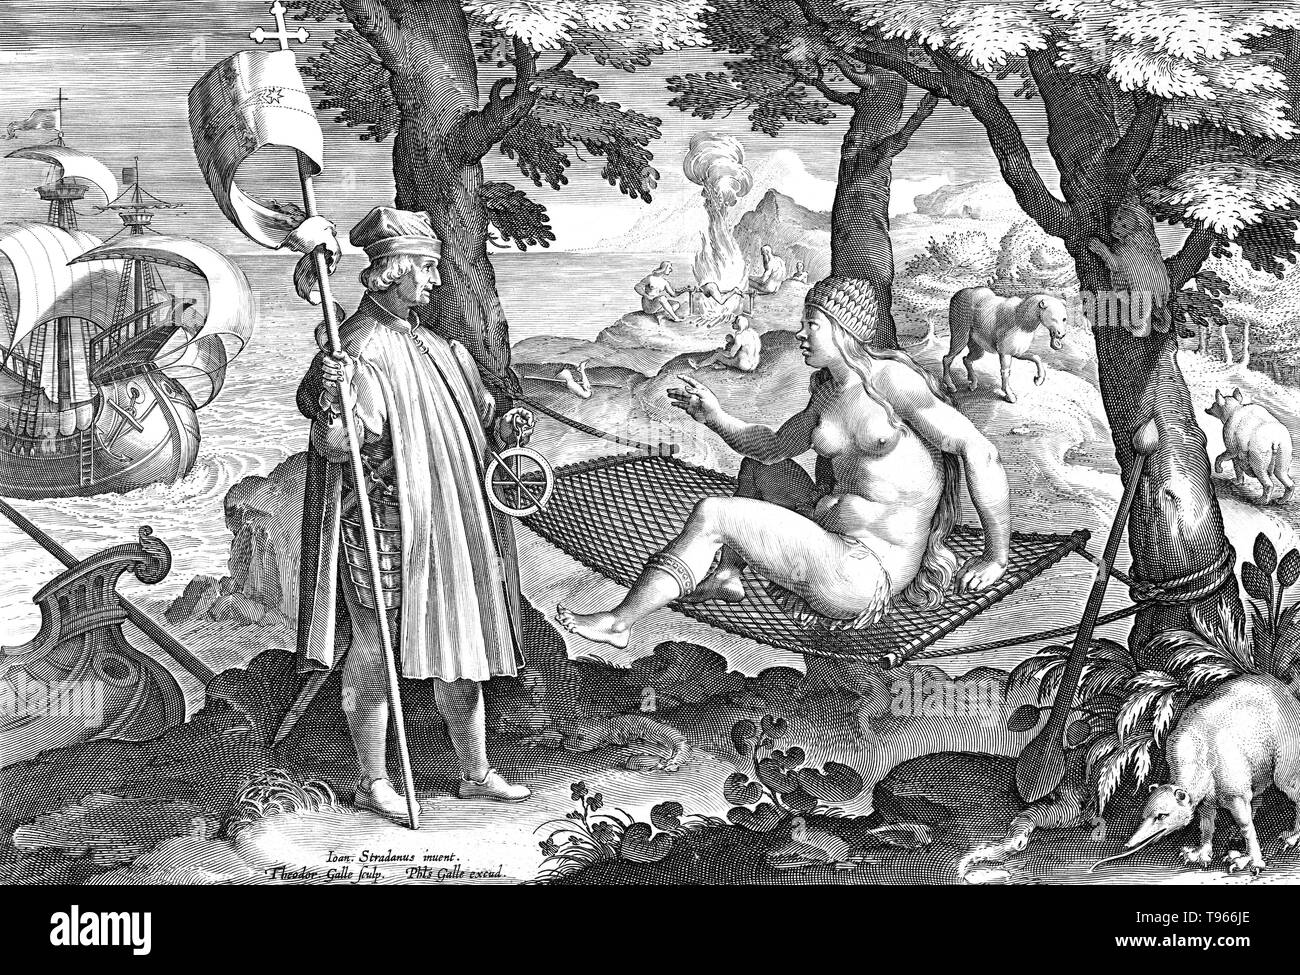 PLATE 1. The Discovery of America. First plate from a print series entitled Nova Reperta (New Inventions of Modern Times) consisting of a title page and 19 plates, engraved by Jan Collaert I, after Jan van der Straet, called Stradanus, and published by Philips Galle. Illustration of a sailor (Vespucci) coming to shore and discovering America. He encounters a native woman seated in a hammock. Stock Photo